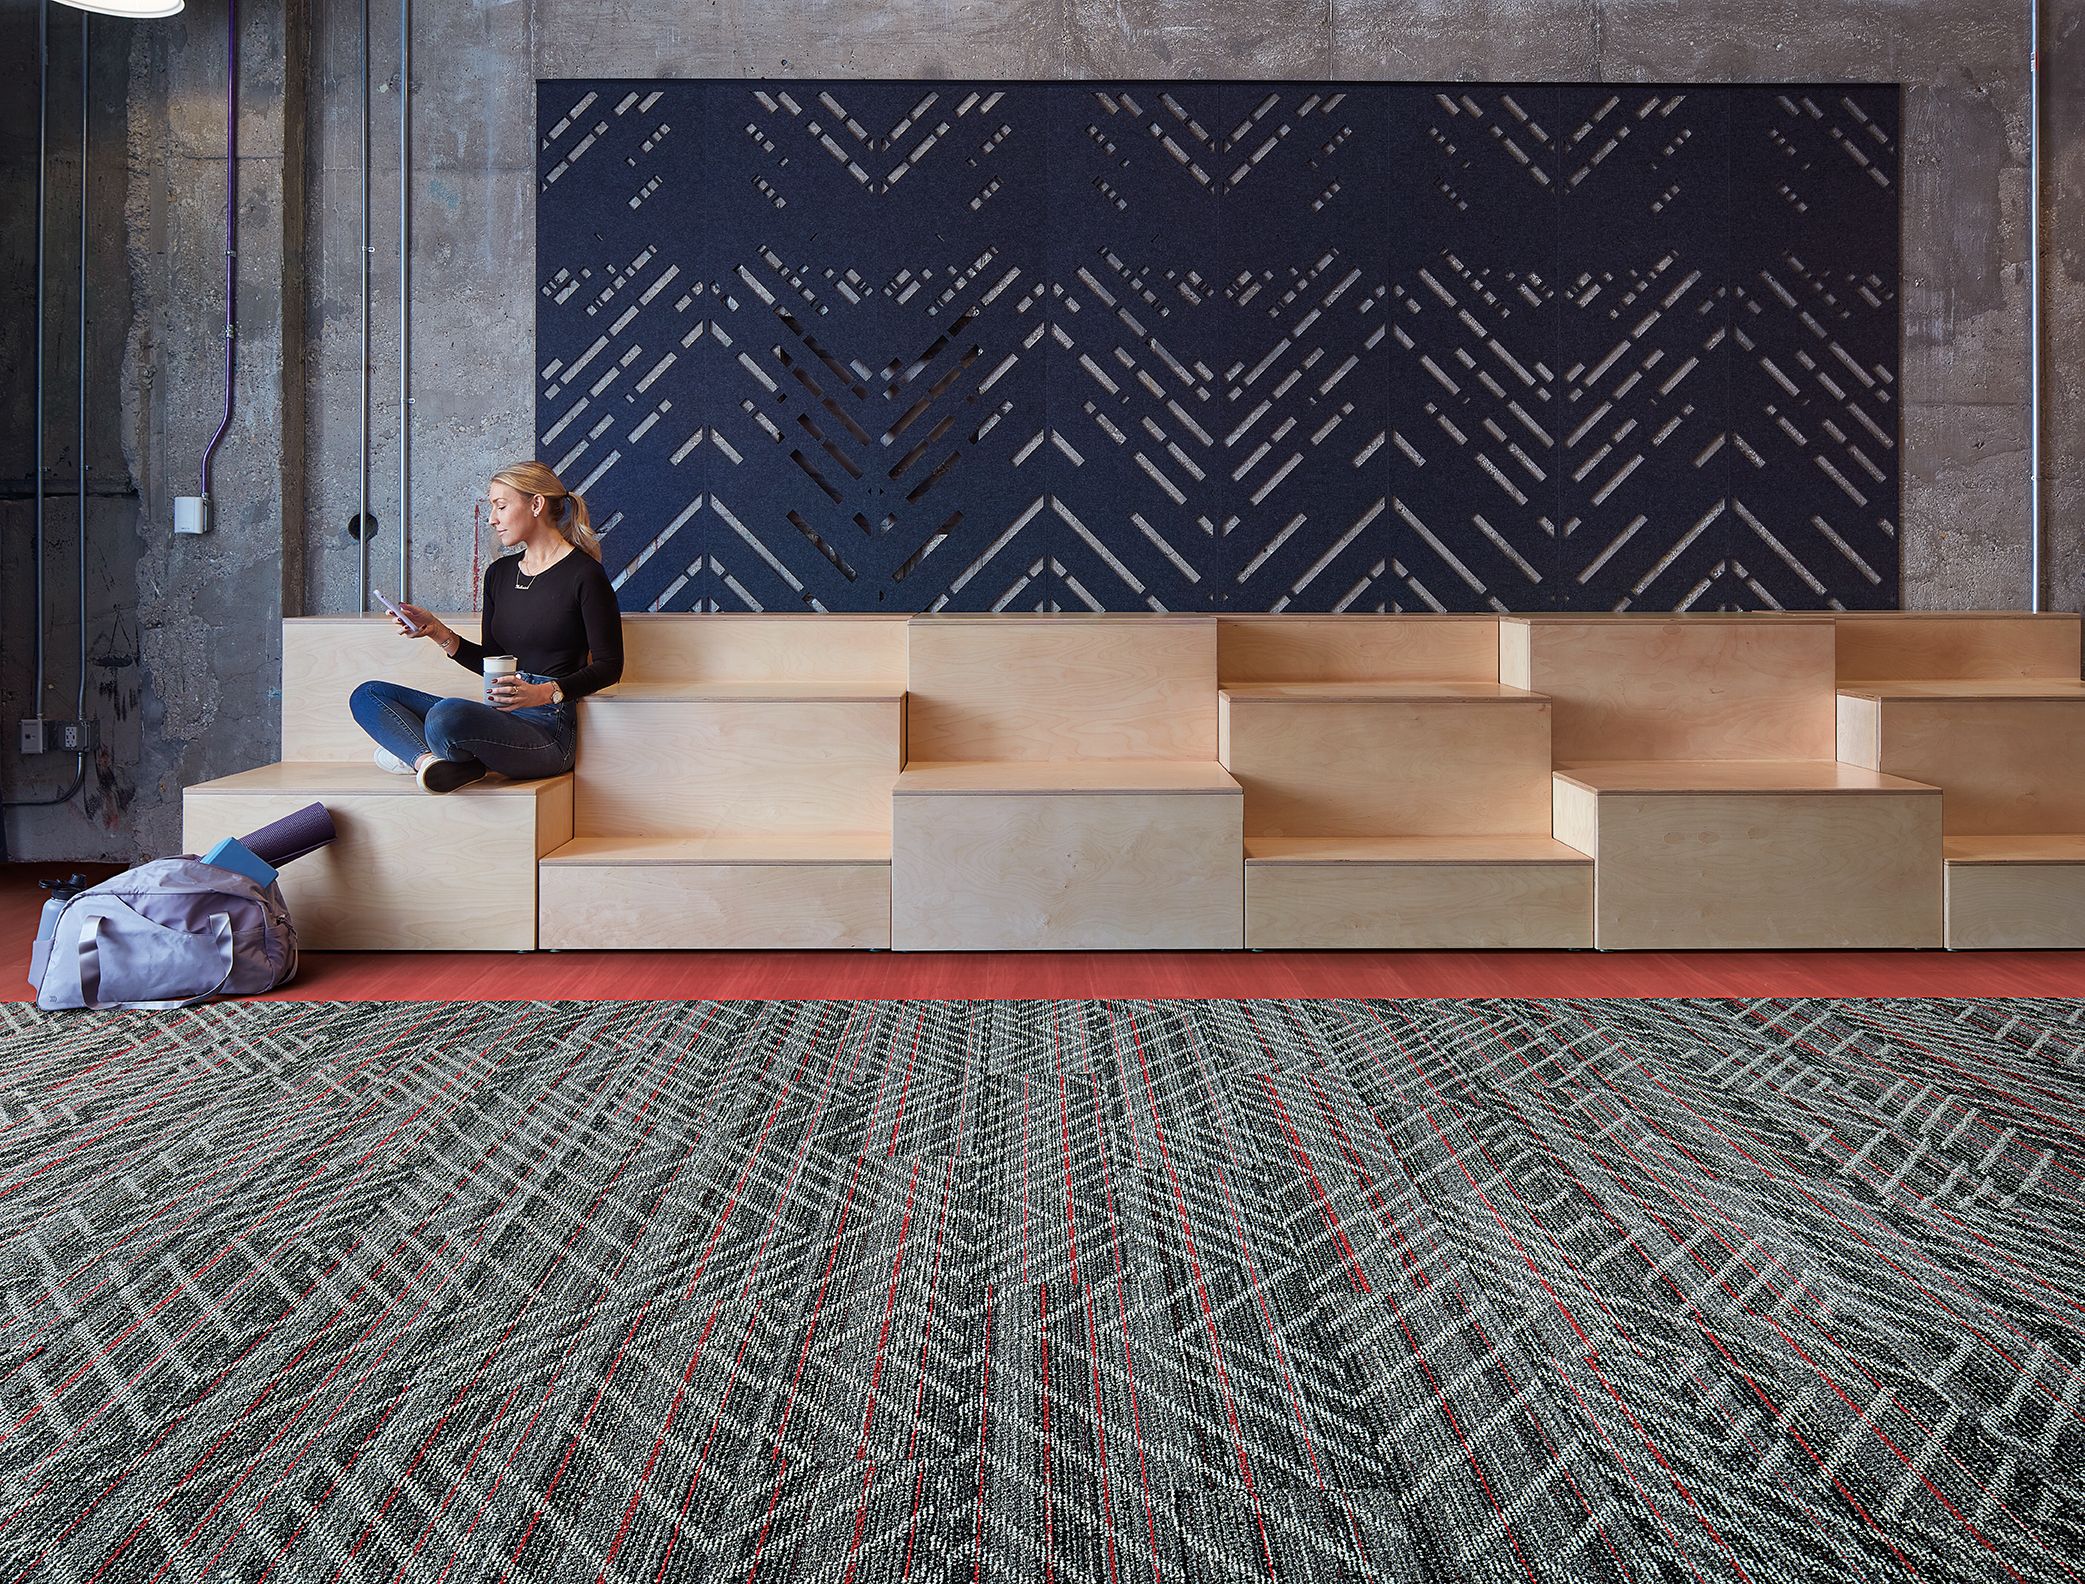 Interface Reflectors plank carpet tile with Studio Set LVT in open area with woman seated on wood risers imagen número 2